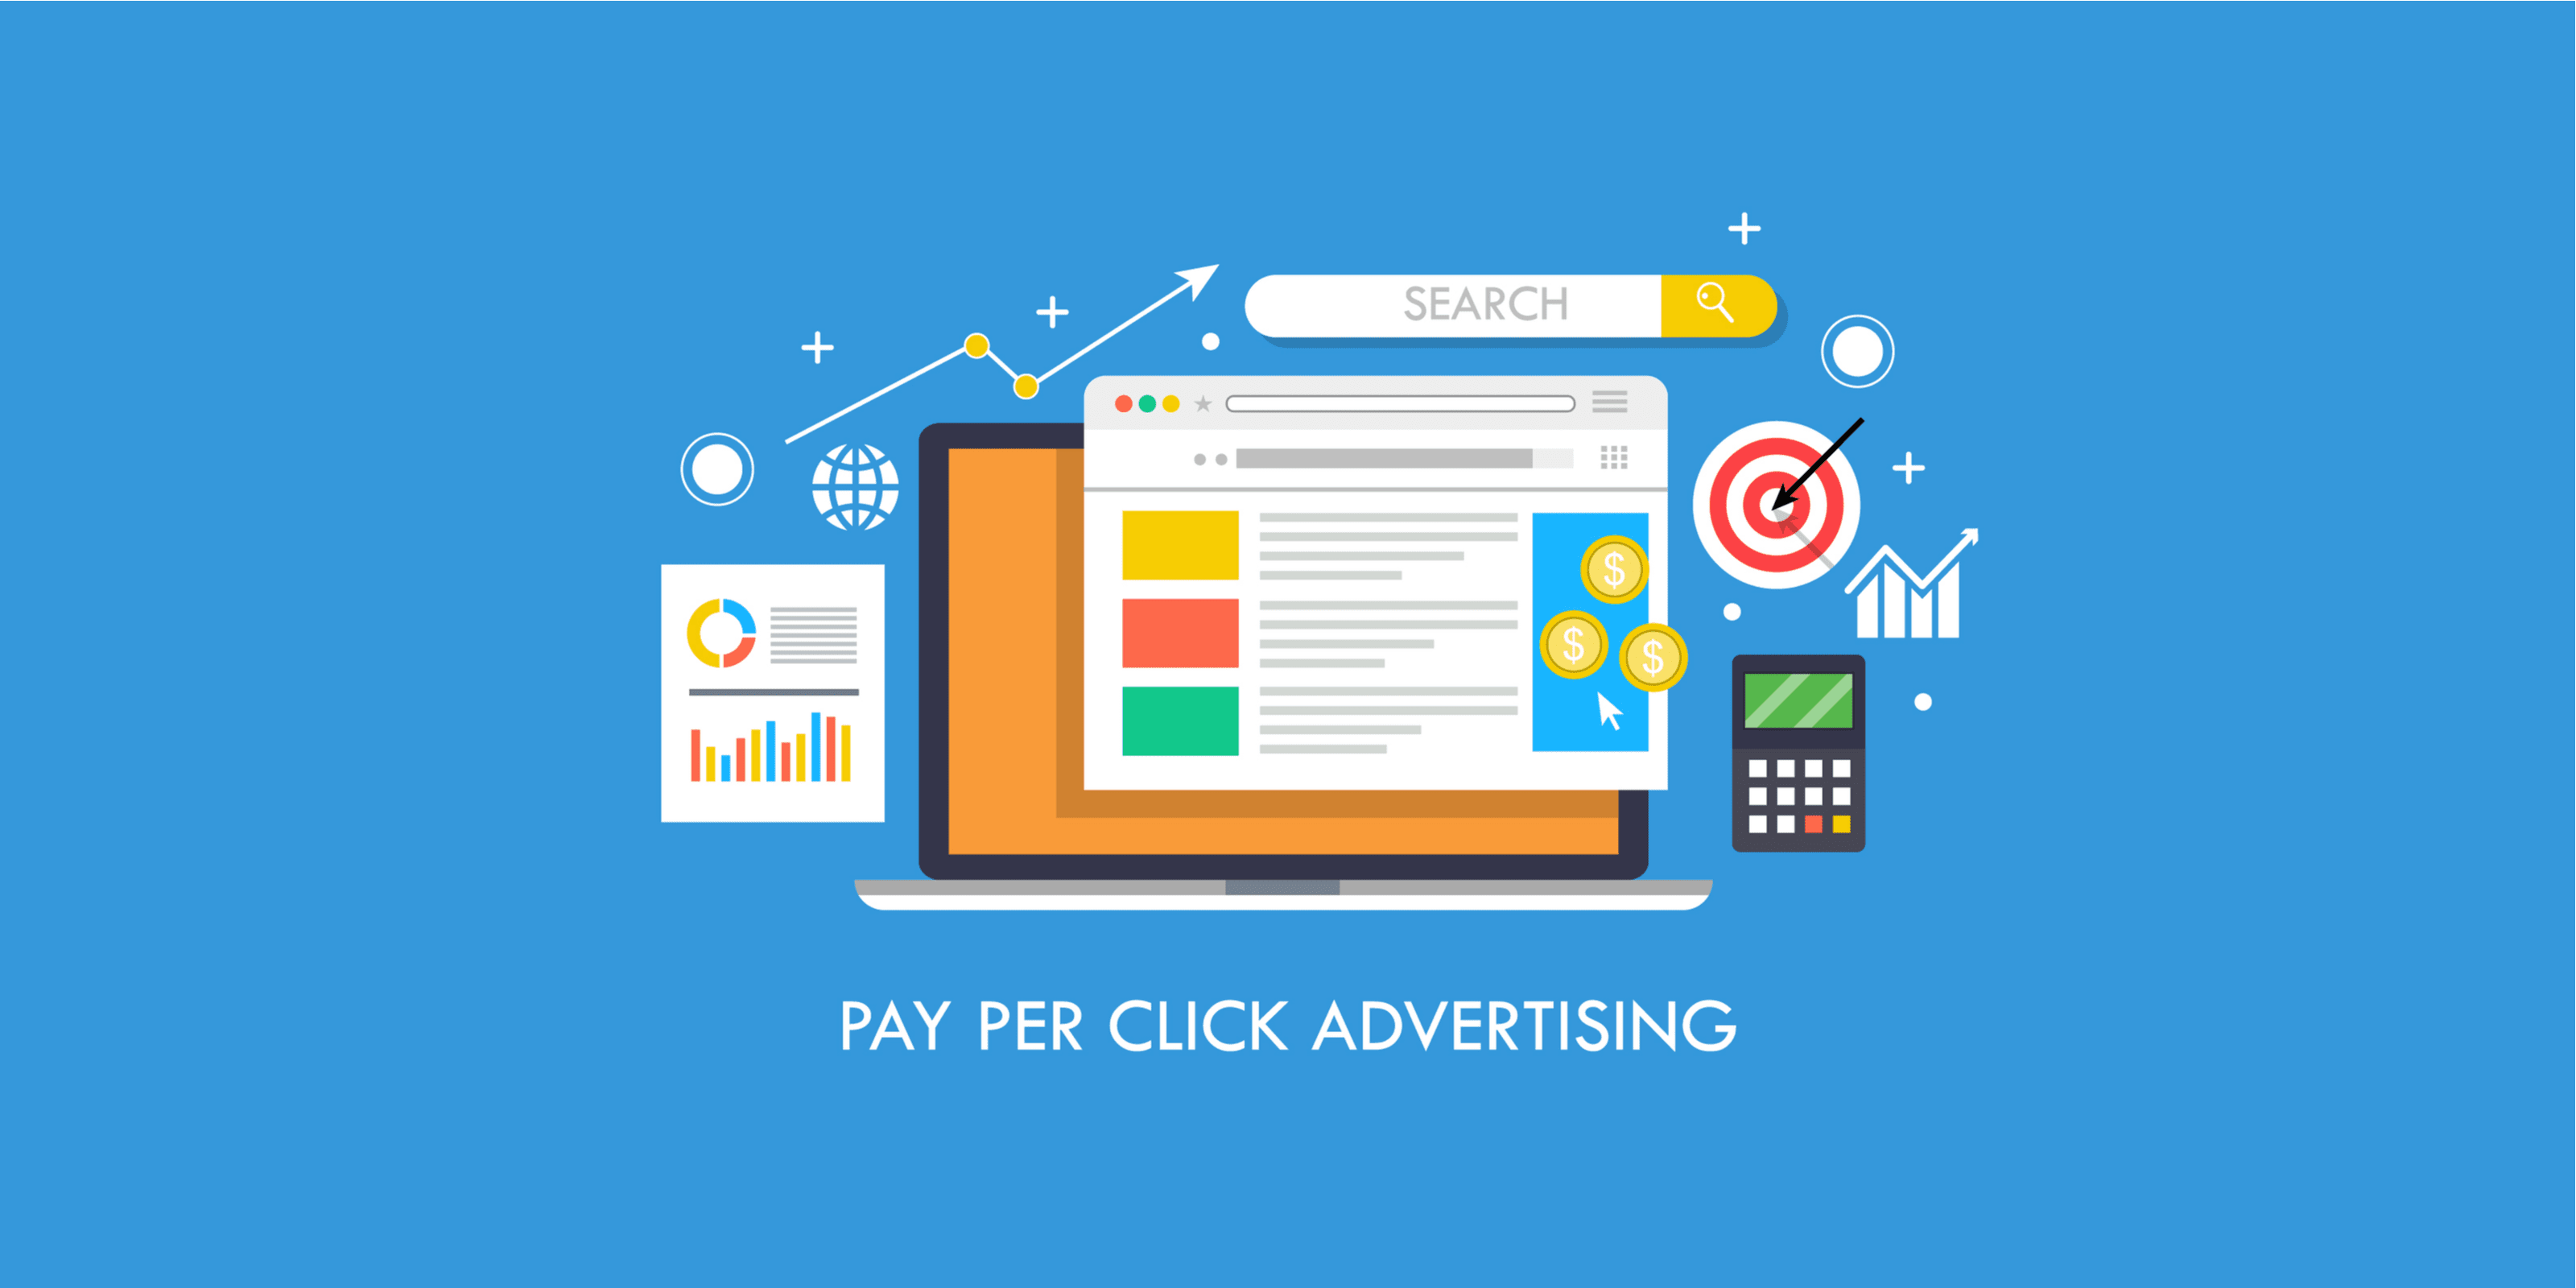 ppc advertising_Flat concept for pay per click advertising, sponsored listing, paid search marketing vector banner with icons isolated on blue background